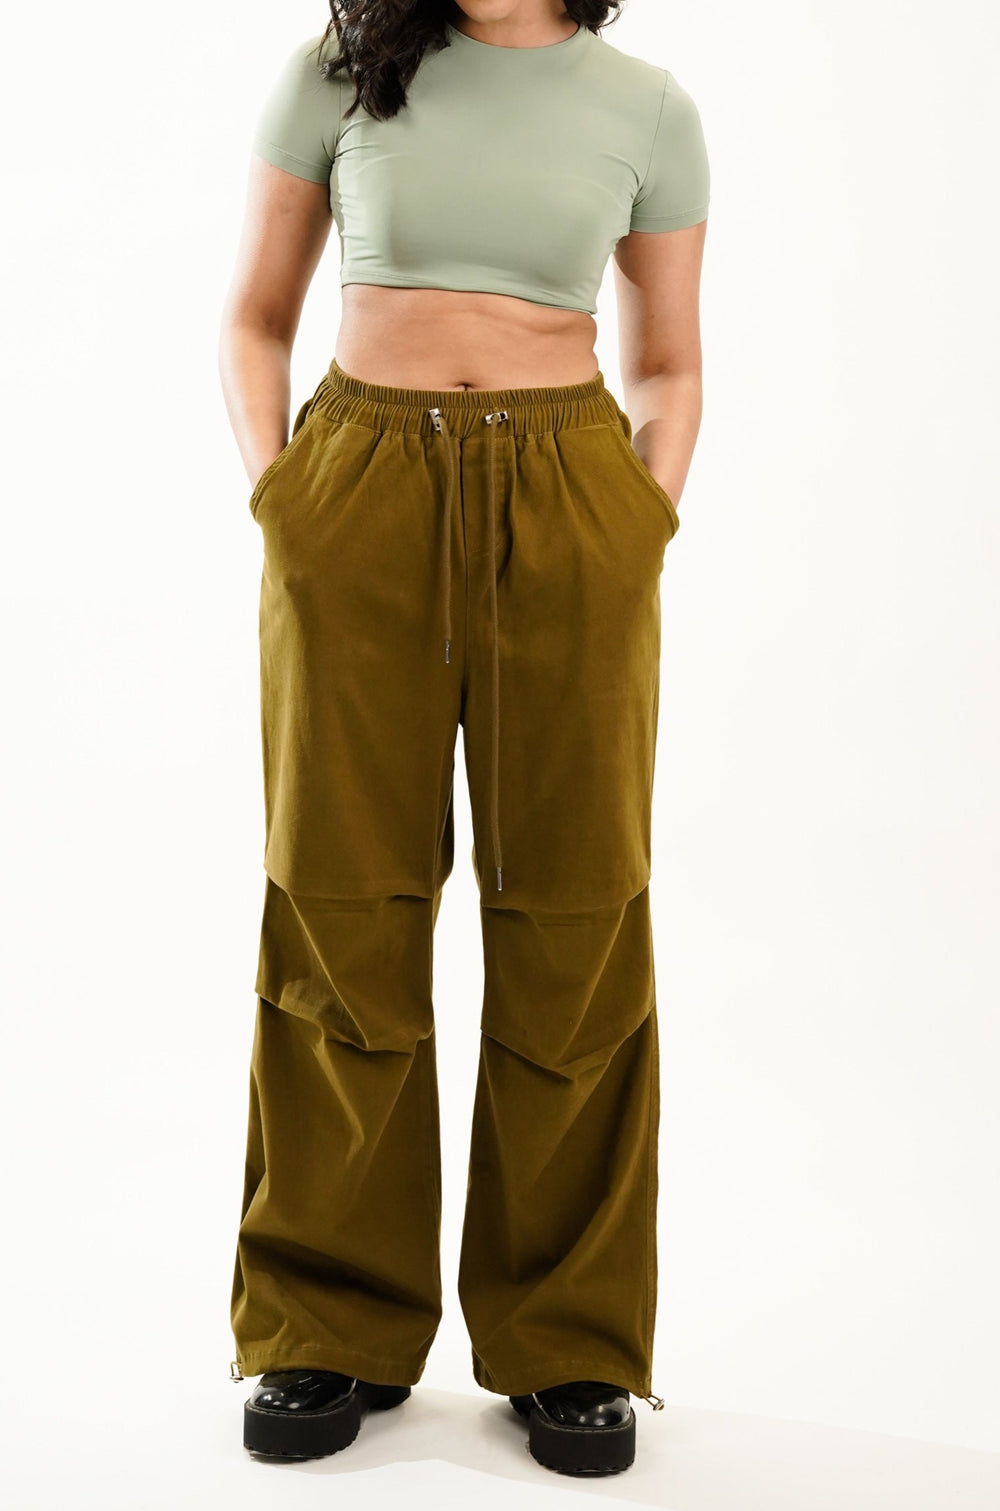 Comfortable wide leg pants for casual wear